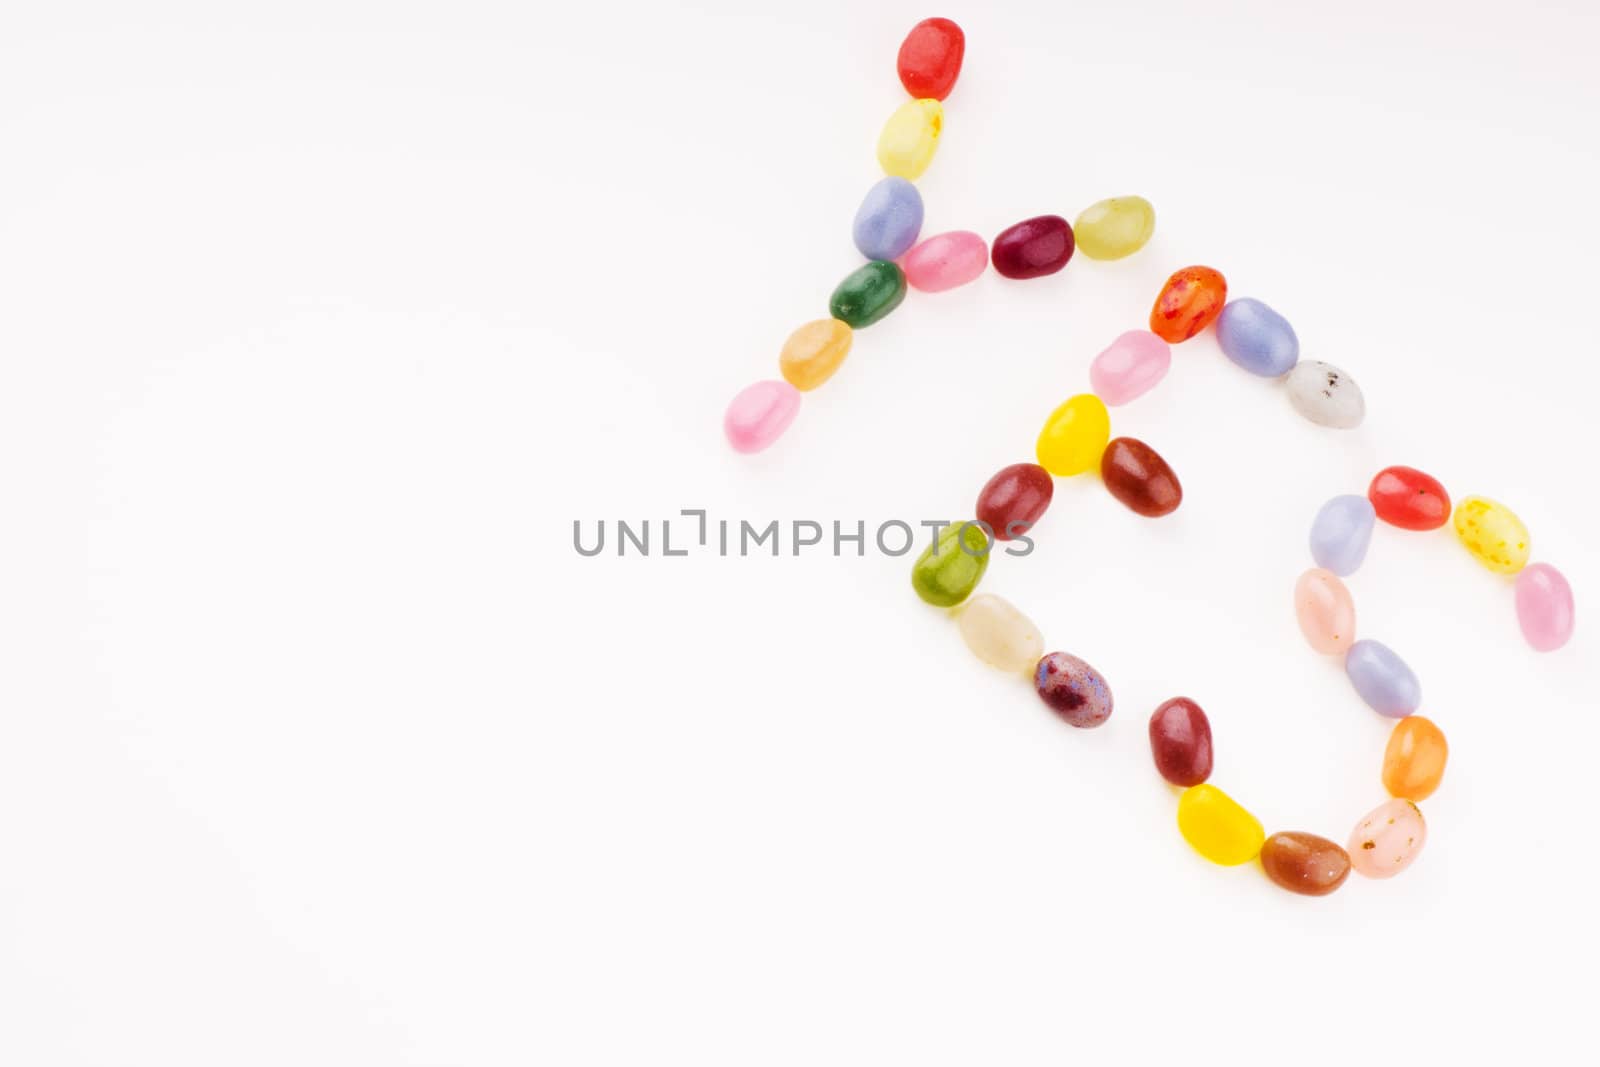 Yes sweet lettering made of colorful candies